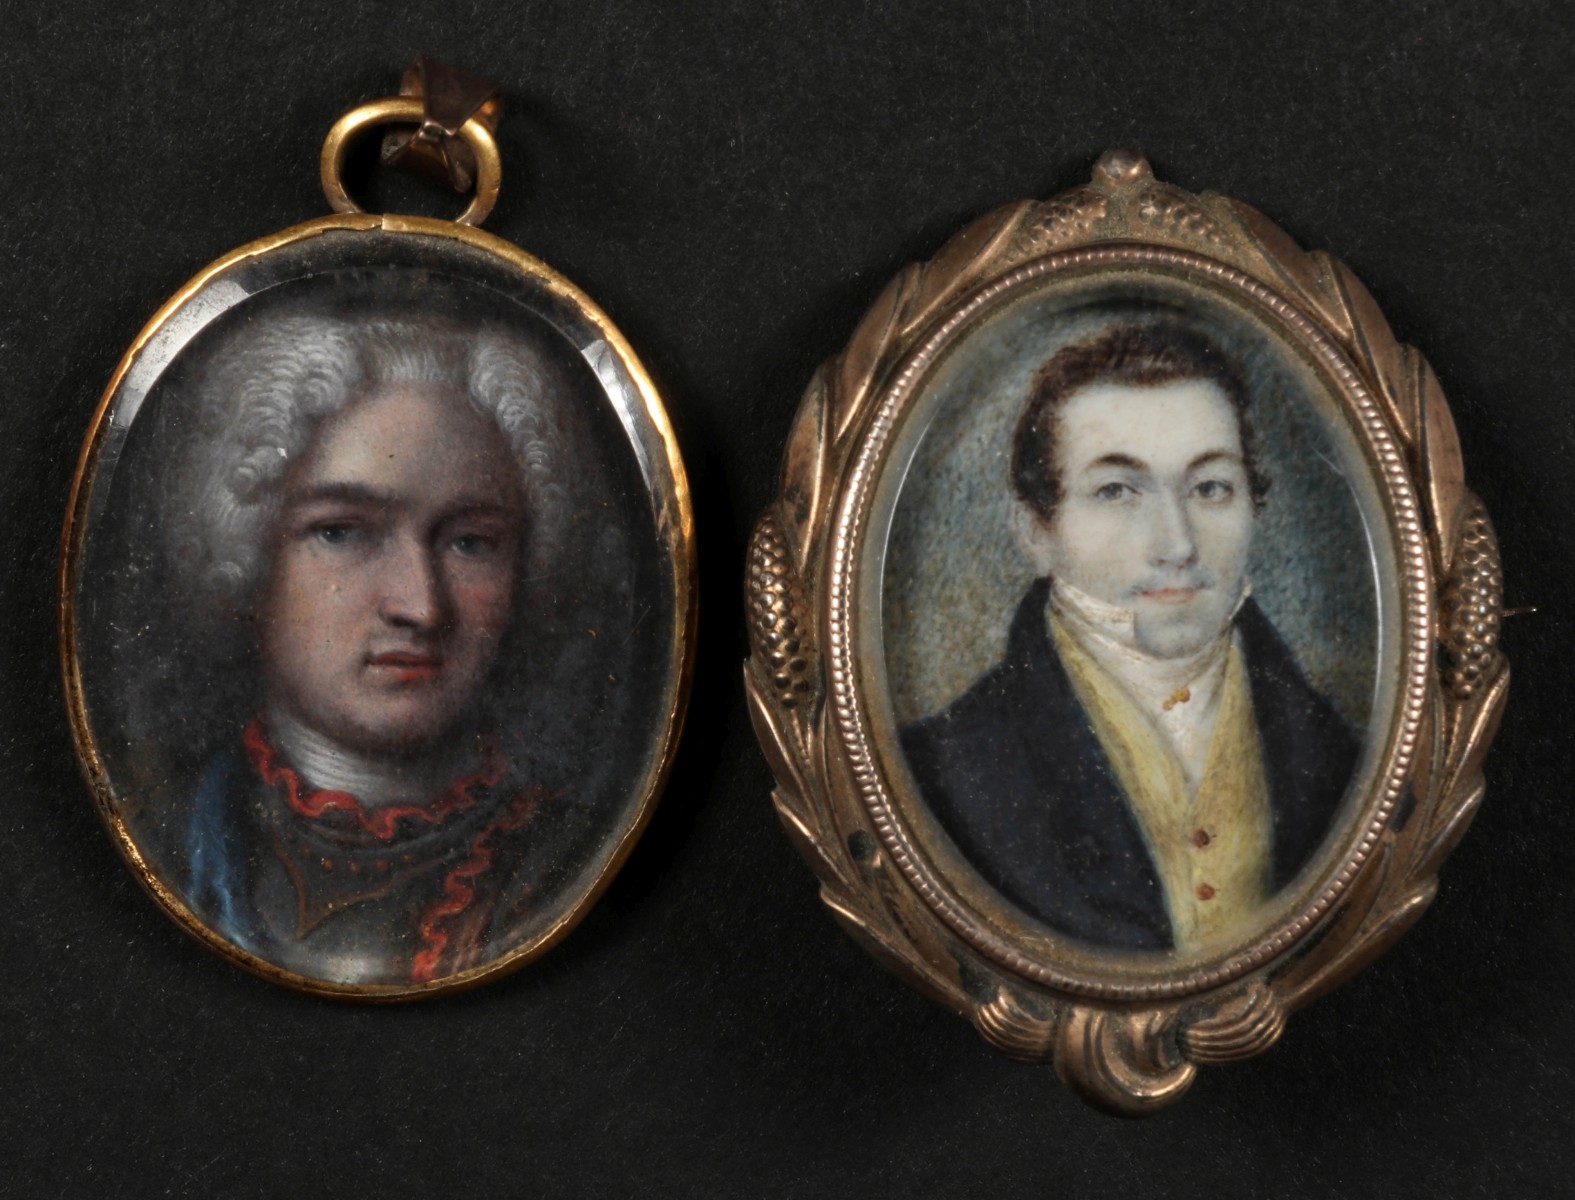 TWO LOCKETS WITH 18TH & 19TH C. MINIATURE PORTRAITS